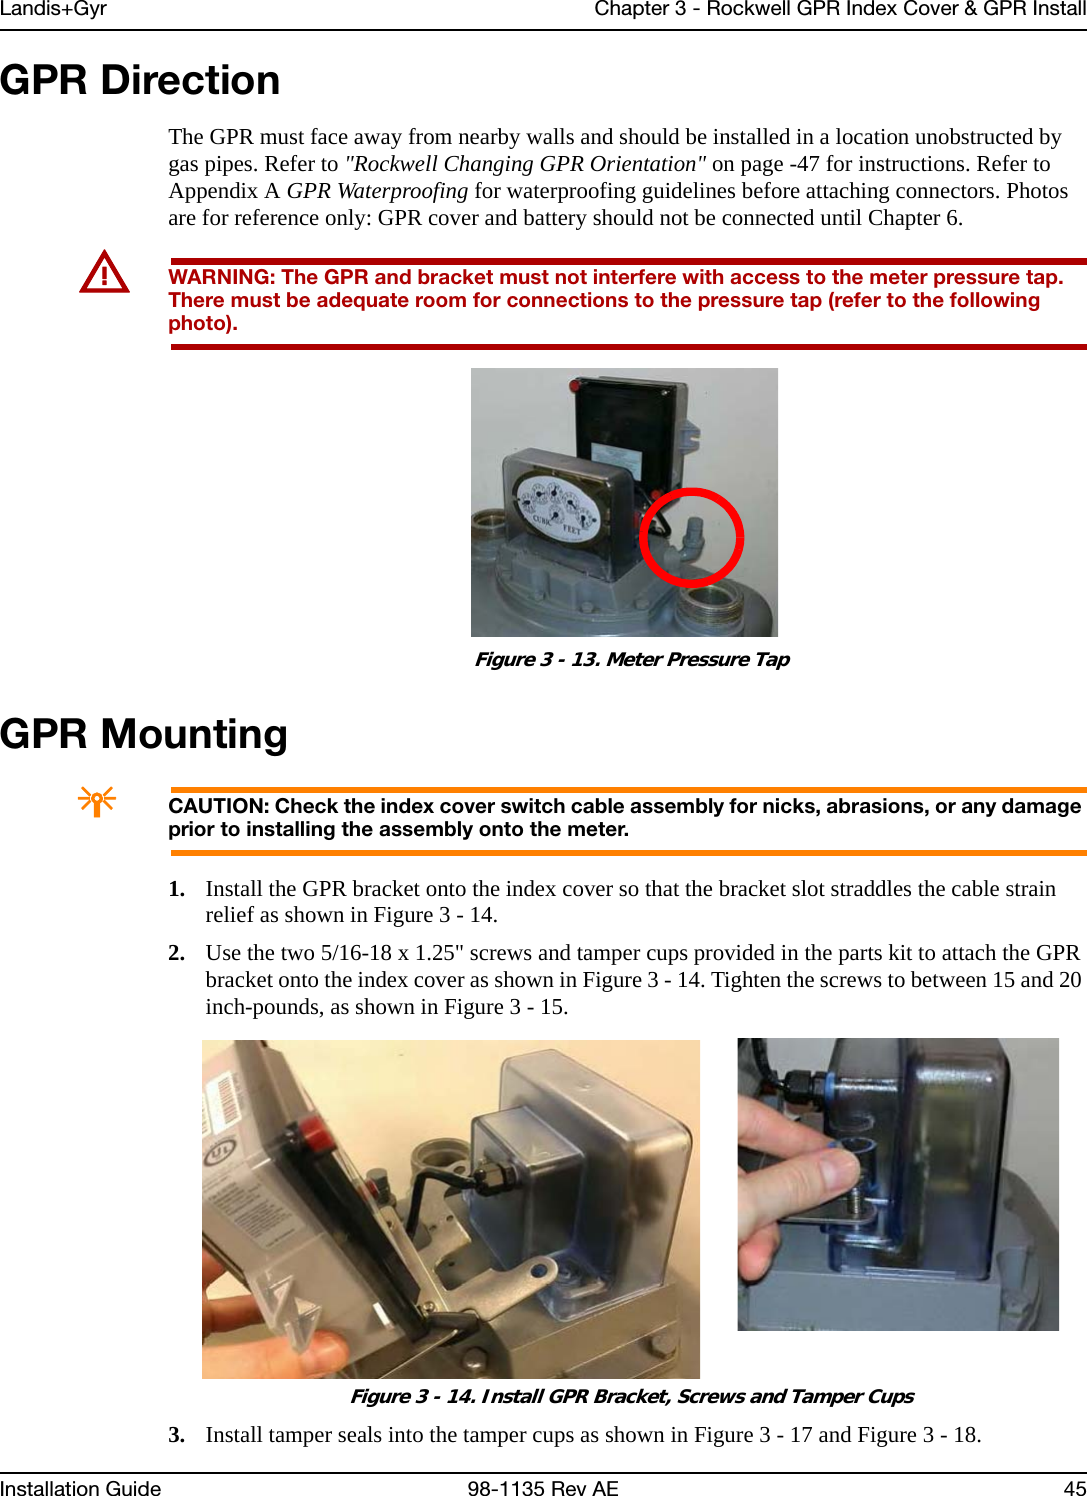 Landis+Gyr Chapter 3 - Rockwell GPR Index Cover &amp; GPR InstallInstallation Guide 98-1135 Rev AE 45GPR DirectionThe GPR must face away from nearby walls and should be installed in a location unobstructed by gas pipes. Refer to &quot;Rockwell Changing GPR Orientation&quot; on page -47 for instructions. Refer to Appendix A GPR Waterproofing for waterproofing guidelines before attaching connectors. Photos are for reference only: GPR cover and battery should not be connected until Chapter 6.UWARNING: The GPR and bracket must not interfere with access to the meter pressure tap. There must be adequate room for connections to the pressure tap (refer to the following photo). Figure 3 - 13. Meter Pressure TapGPR MountingACAUTION: Check the index cover switch cable assembly for nicks, abrasions, or any damage prior to installing the assembly onto the meter.1. Install the GPR bracket onto the index cover so that the bracket slot straddles the cable strain relief as shown in Figure 3 - 14.2. Use the two 5/16-18 x 1.25&quot; screws and tamper cups provided in the parts kit to attach the GPR bracket onto the index cover as shown in Figure 3 - 14. Tighten the screws to between 15 and 20 inch-pounds, as shown in Figure 3 - 15. Figure 3 - 14. Install GPR Bracket, Screws and Tamper Cups3. Install tamper seals into the tamper cups as shown in Figure 3 - 17 and Figure 3 - 18.